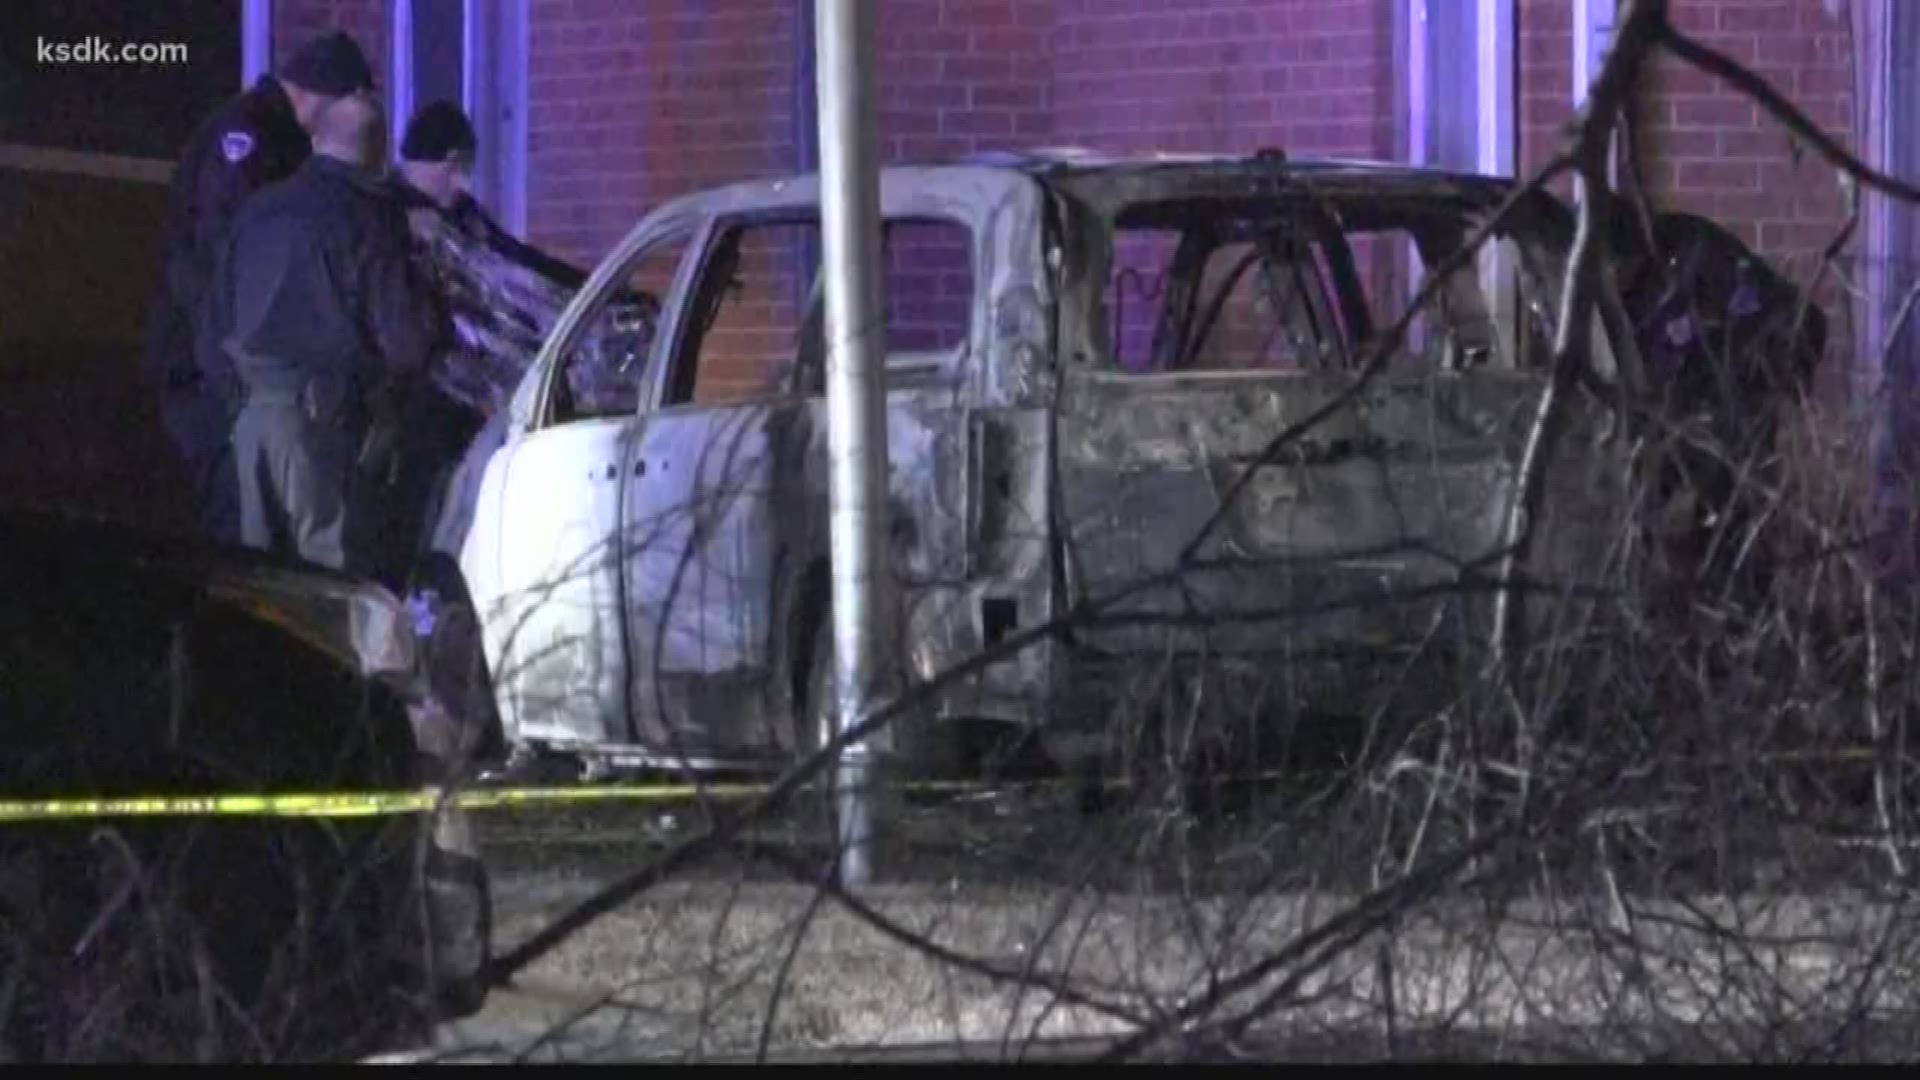 A burning body was found under a van outside an apartment building in Wellston. Detectives with the North County Police Cooperative say it could be a homicide.